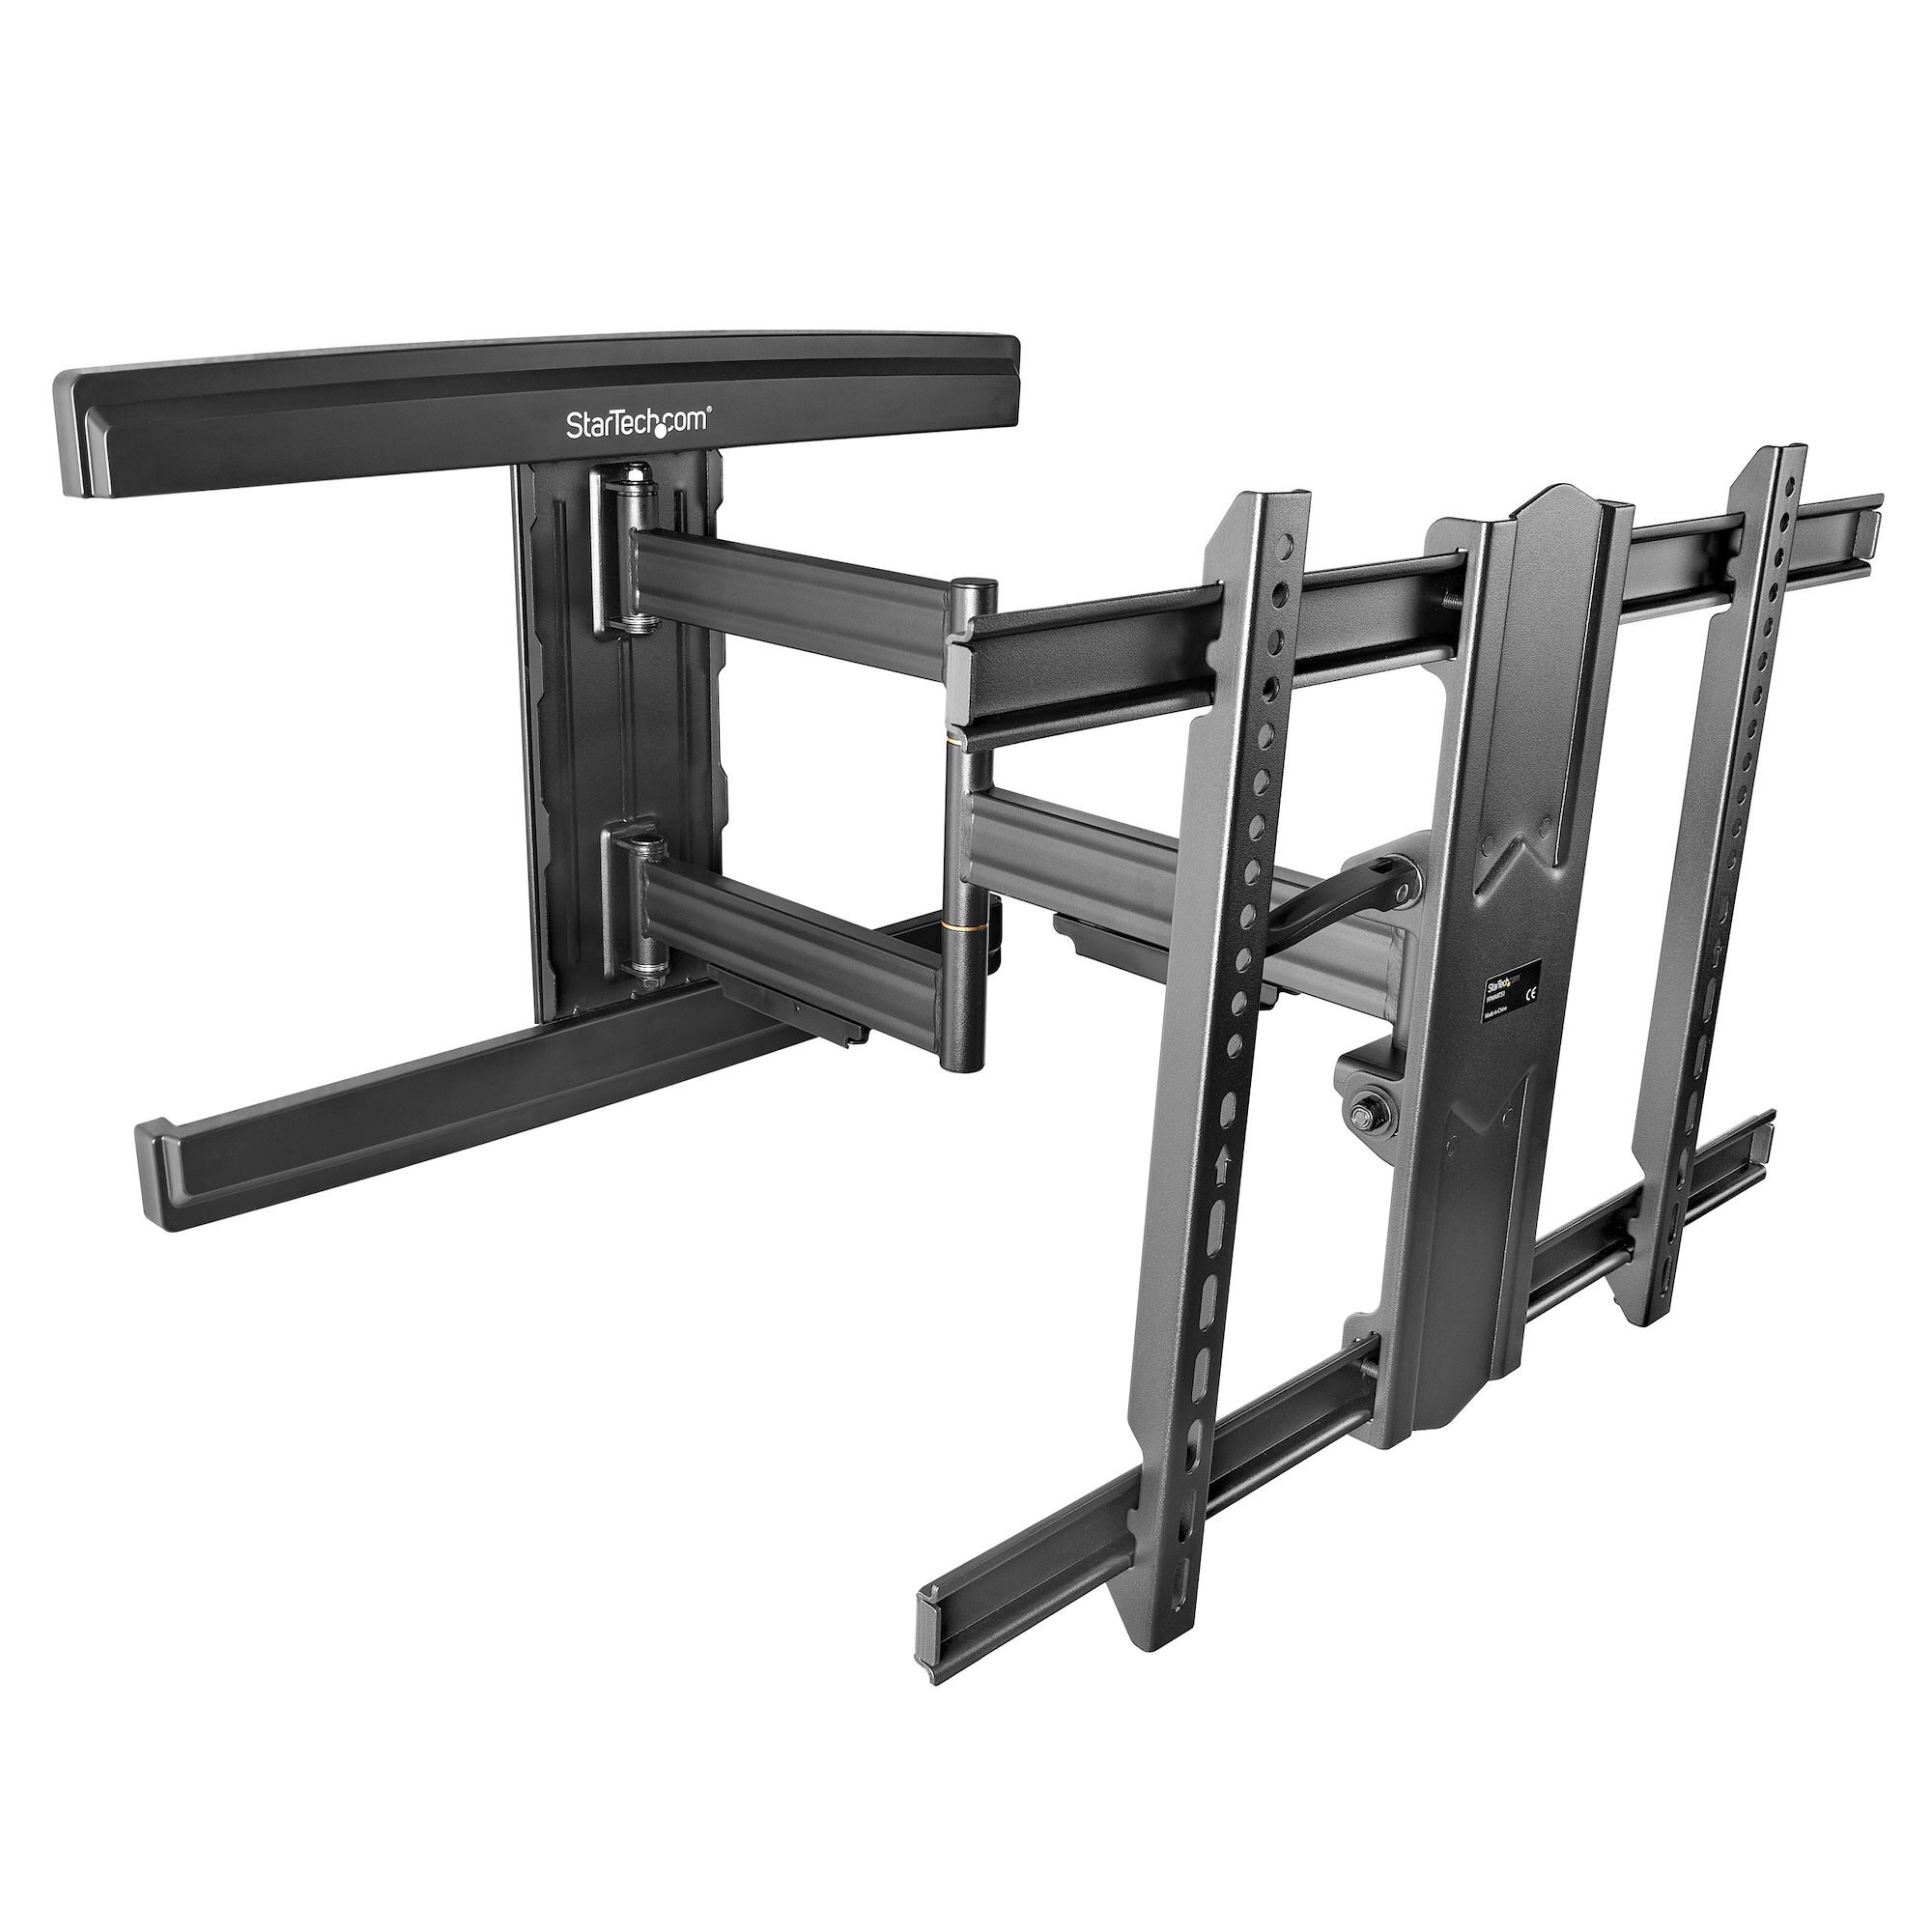 StarTech.com TV Wall Mount for up to 80 inch (110lb) VESA Mount